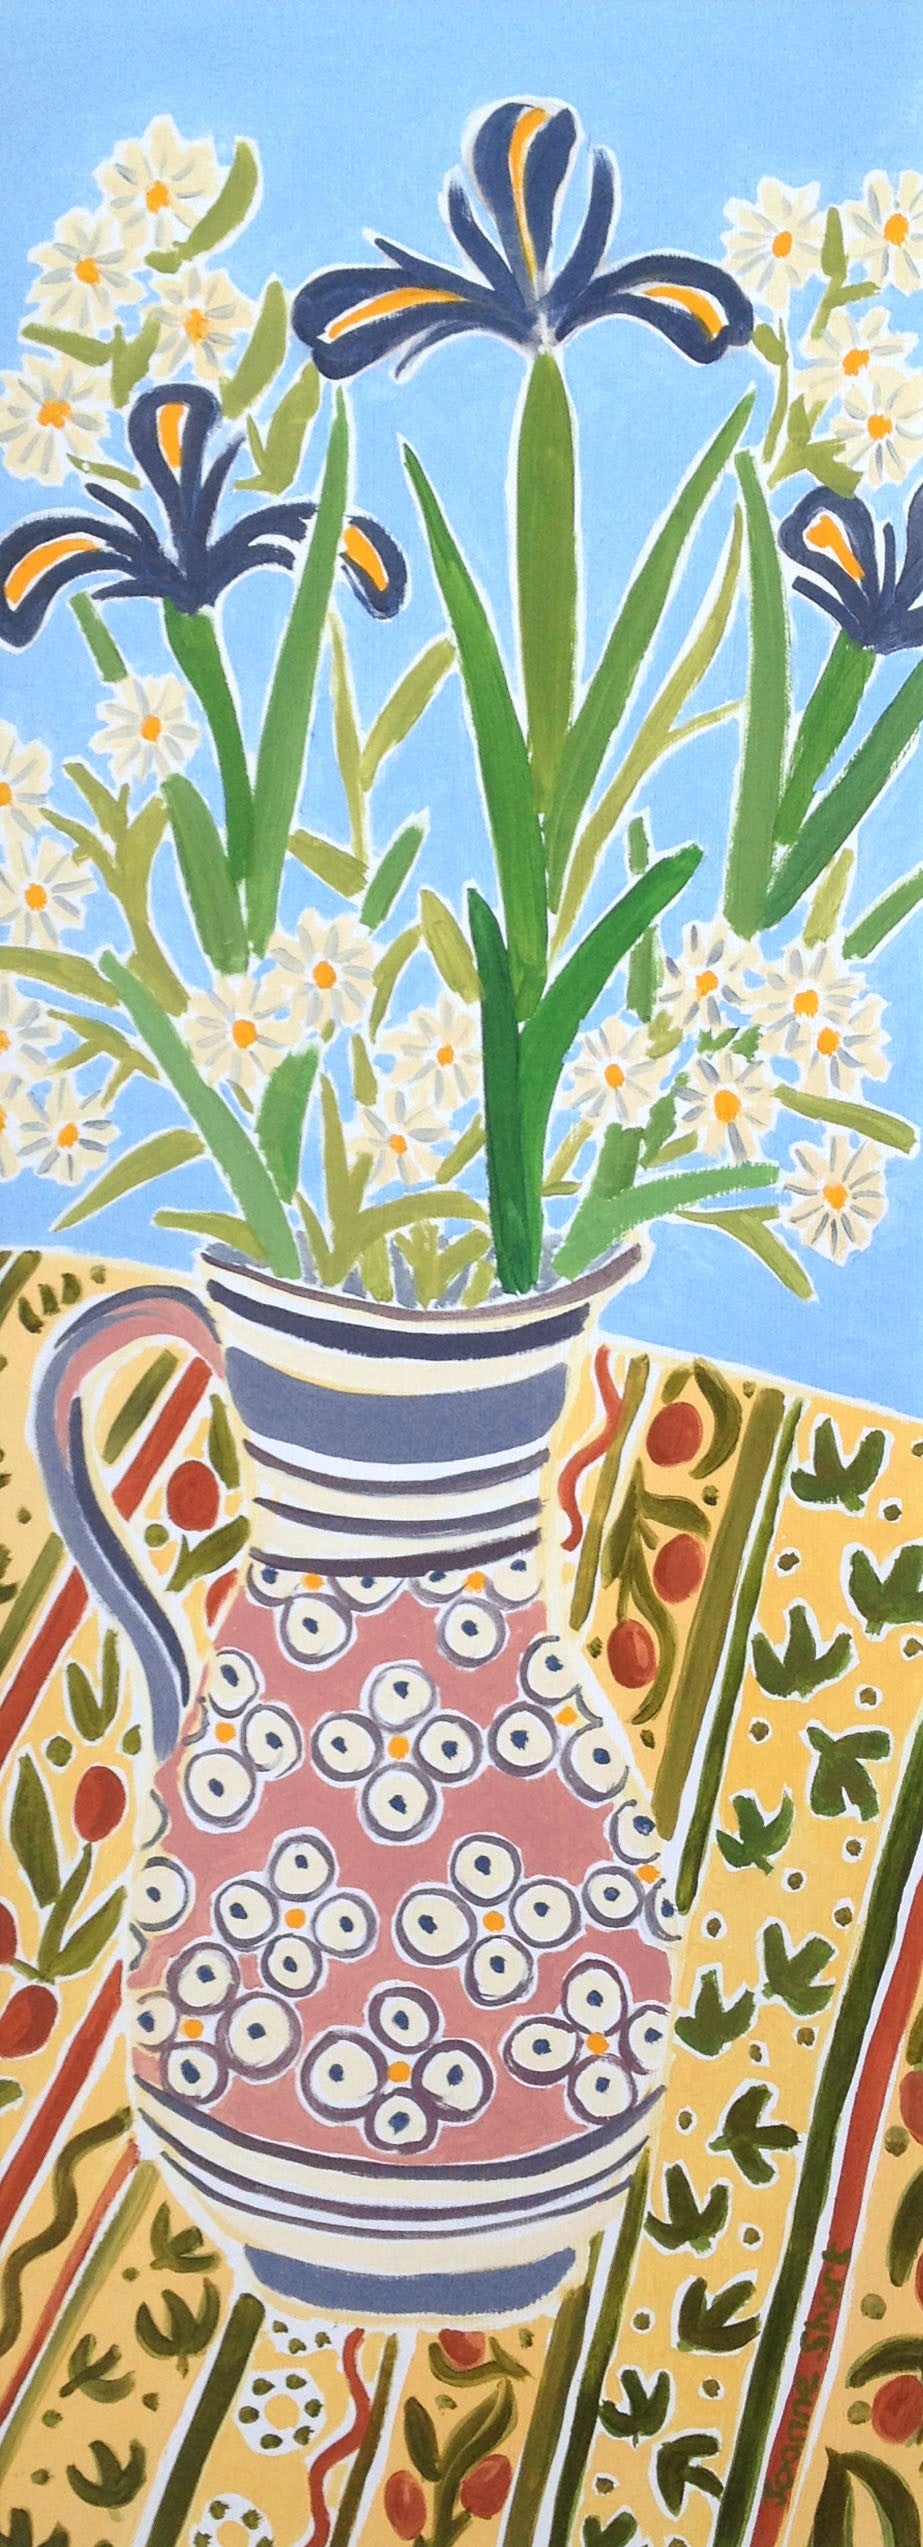 Original Still Life Painting by Joanne Short. Blue Iris in a Pink Jug. Provence, France.